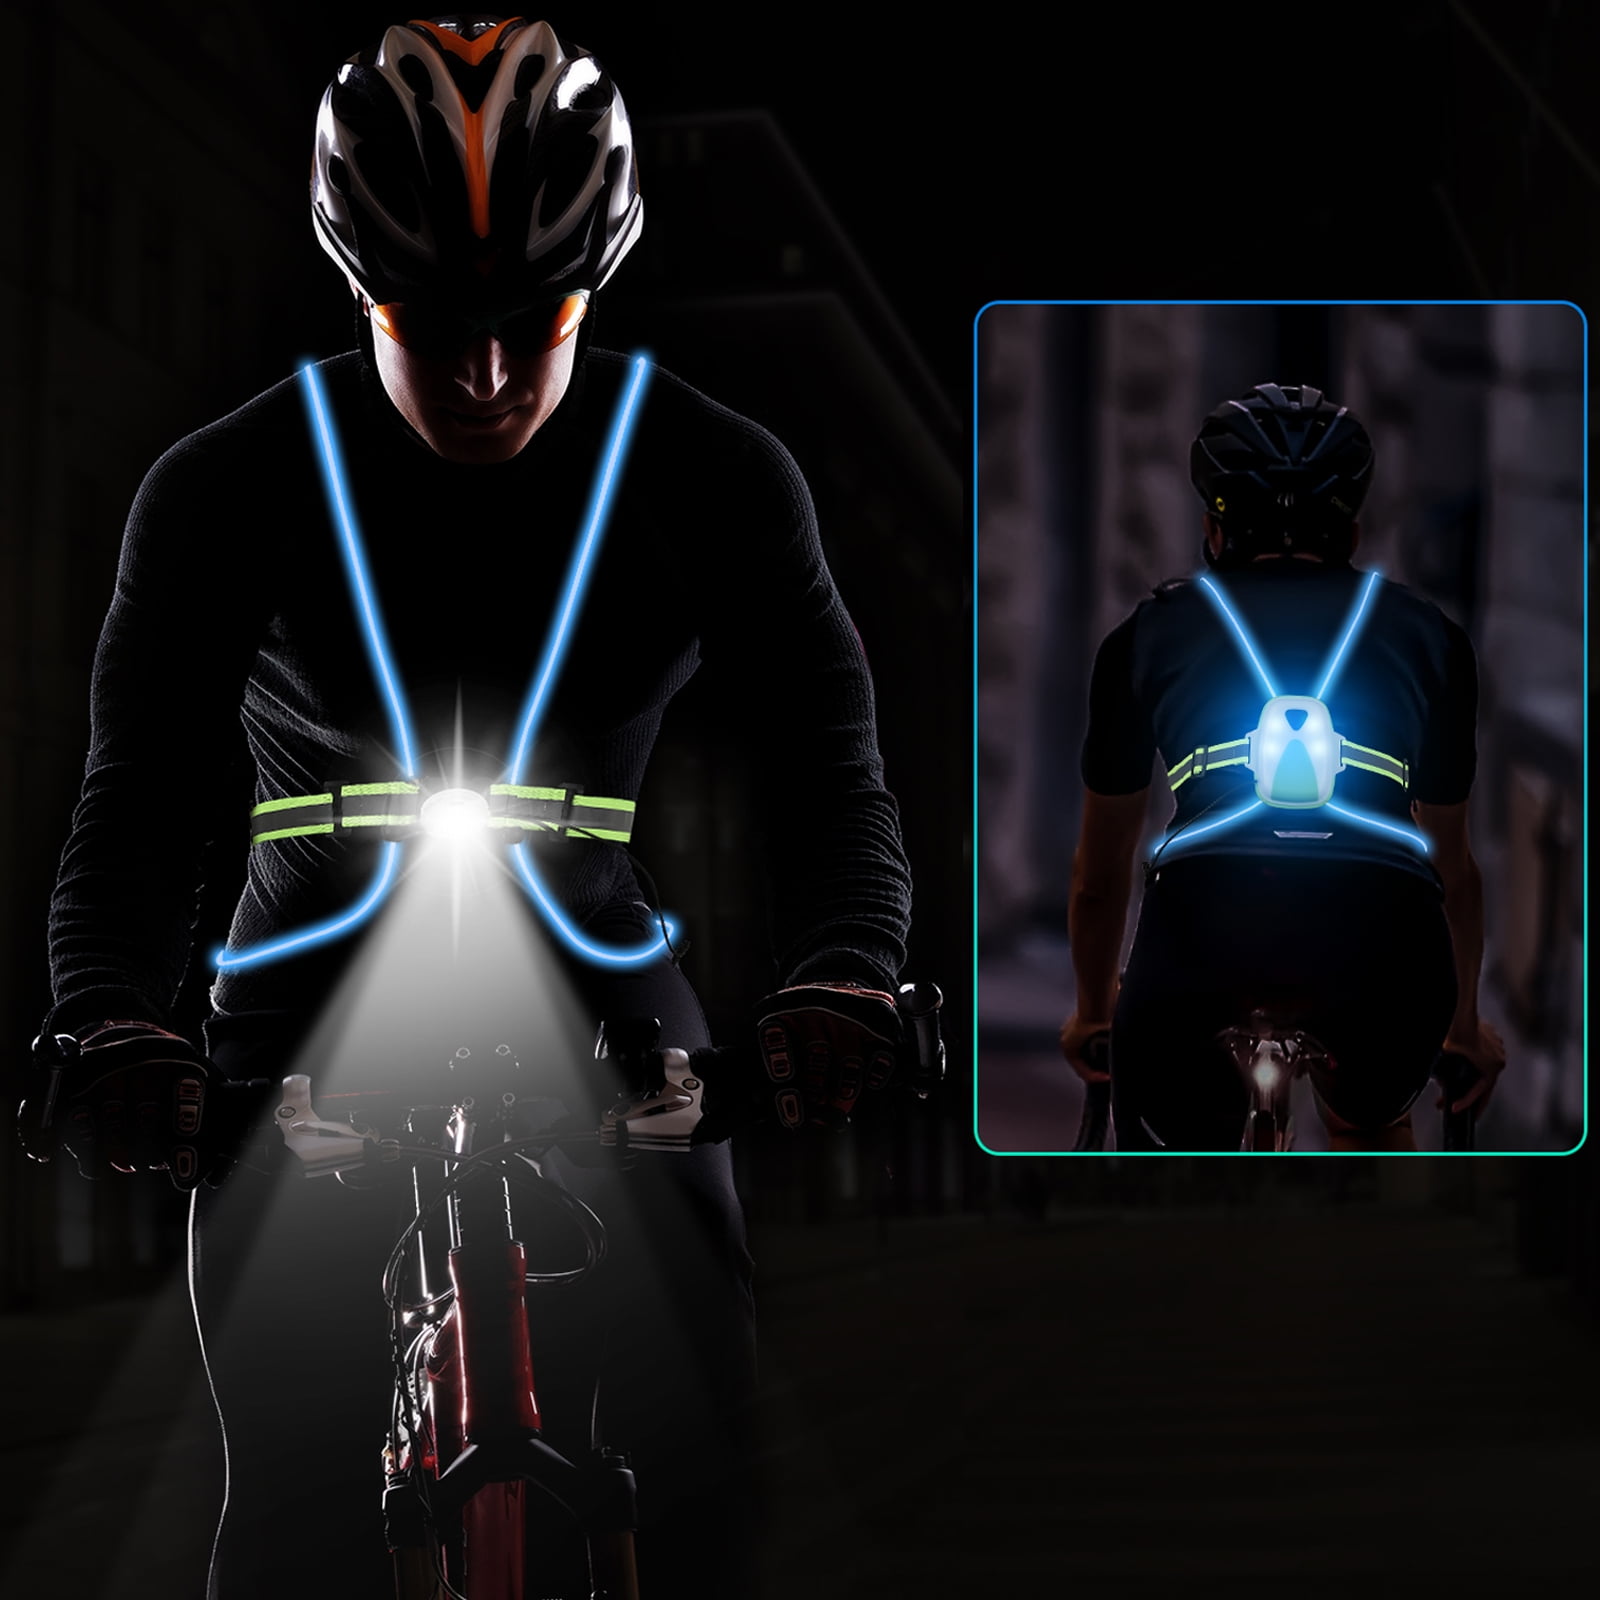 LED Reflective Arm Armband Strap For Night Running And Cycling Motorcycle  Reflective Vest Belt From Pubao, $15.11